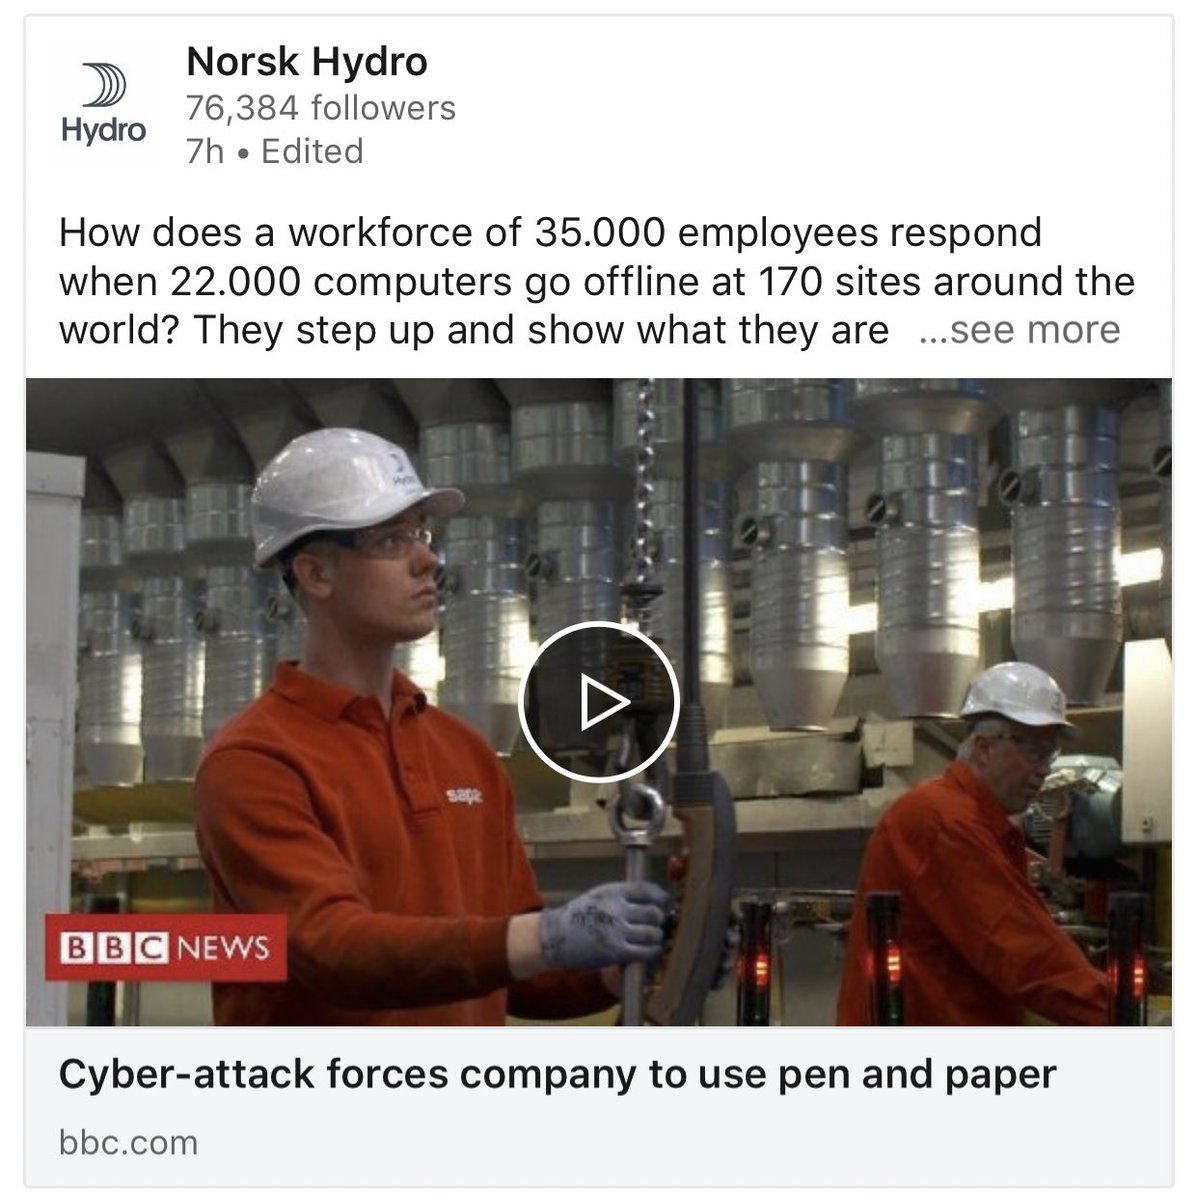 How many companies would link news stories about their own ransomware nightmare on social media?